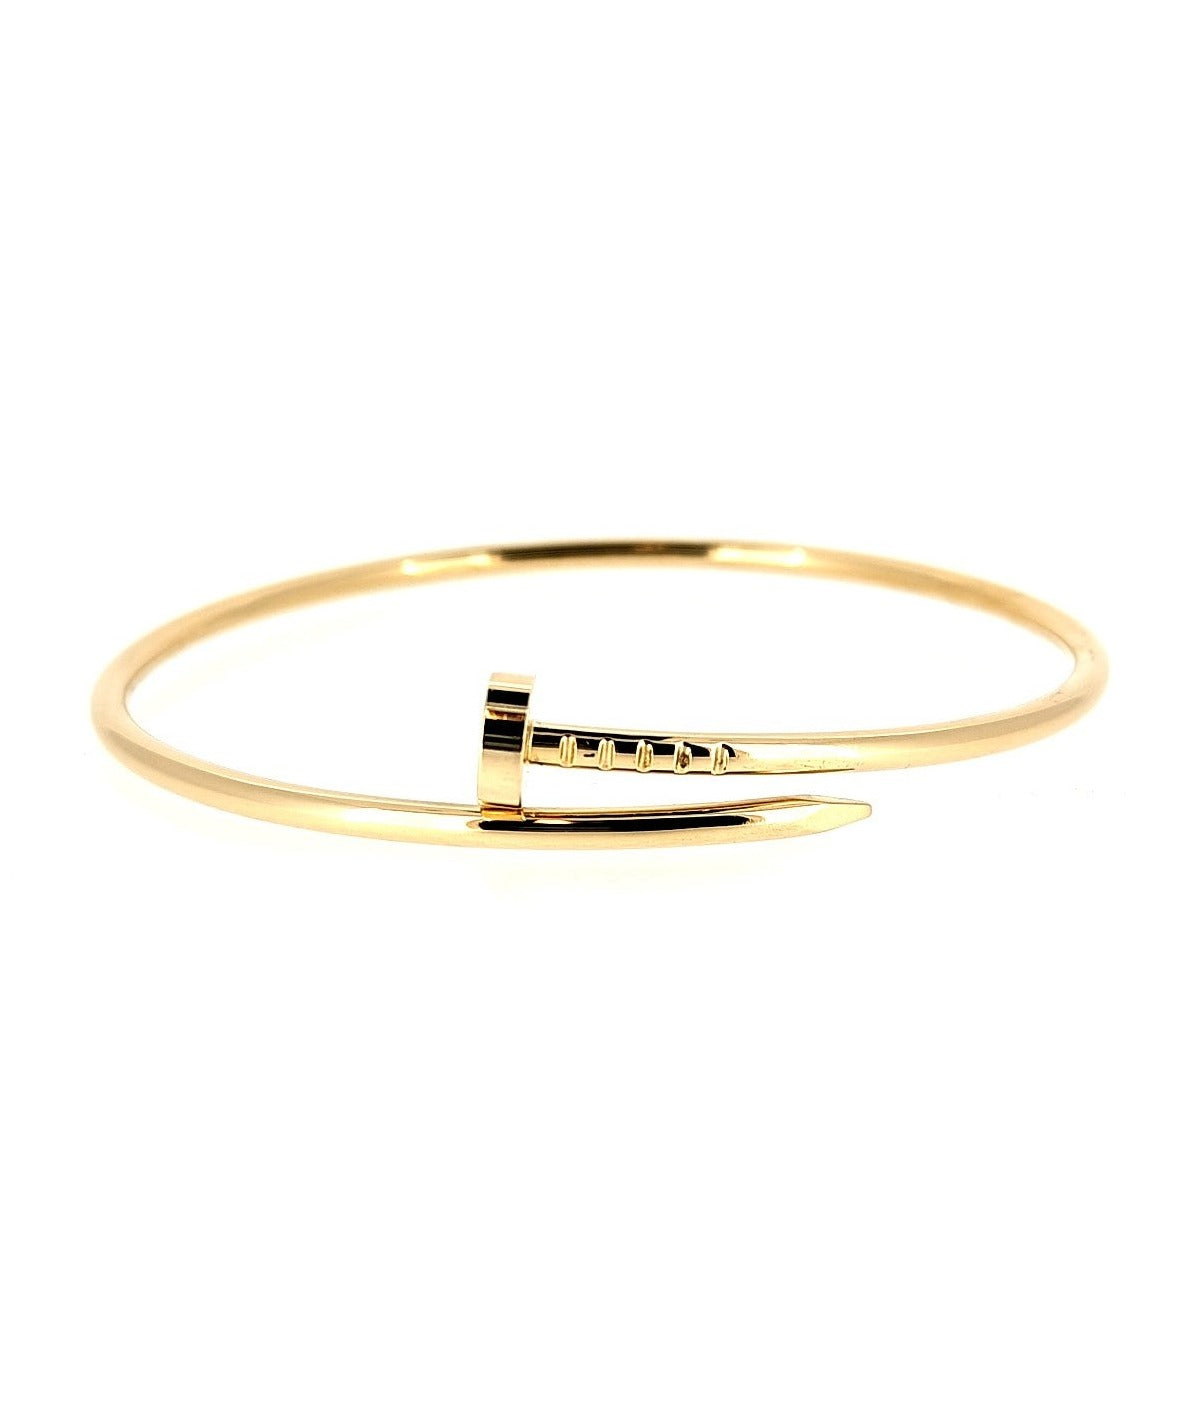 Cartier Love Bracelet Size 17 or 18: How to Choose? 